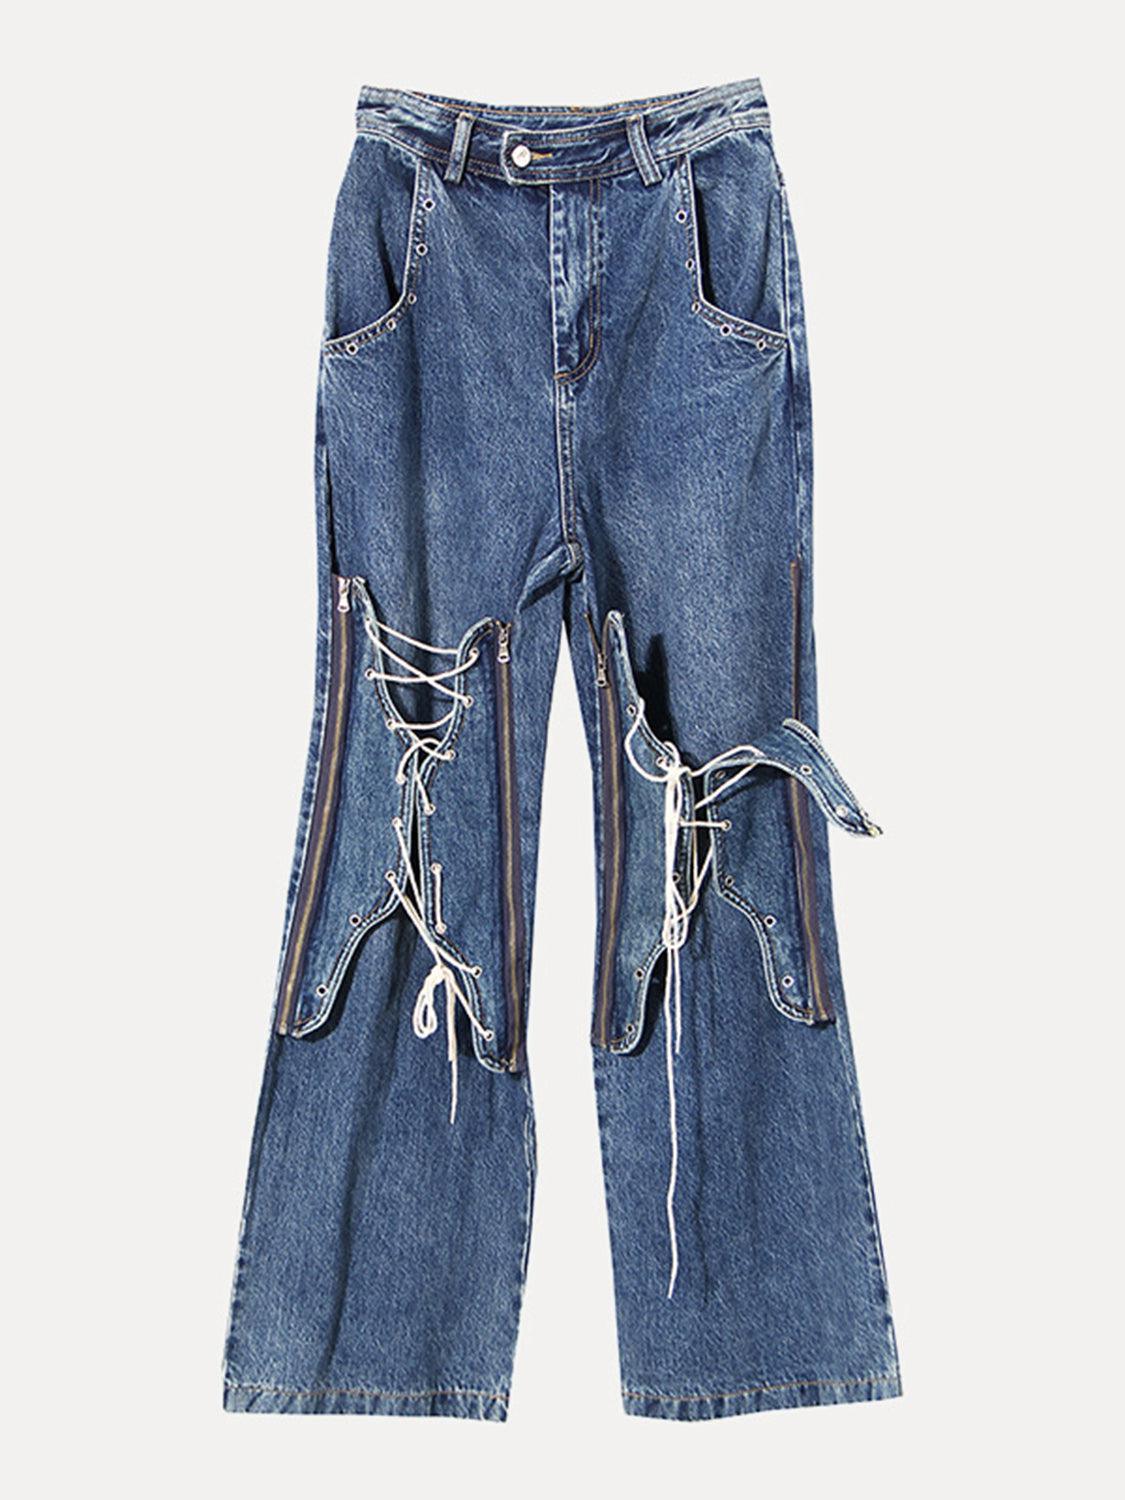 a pair of blue jeans with laces on them